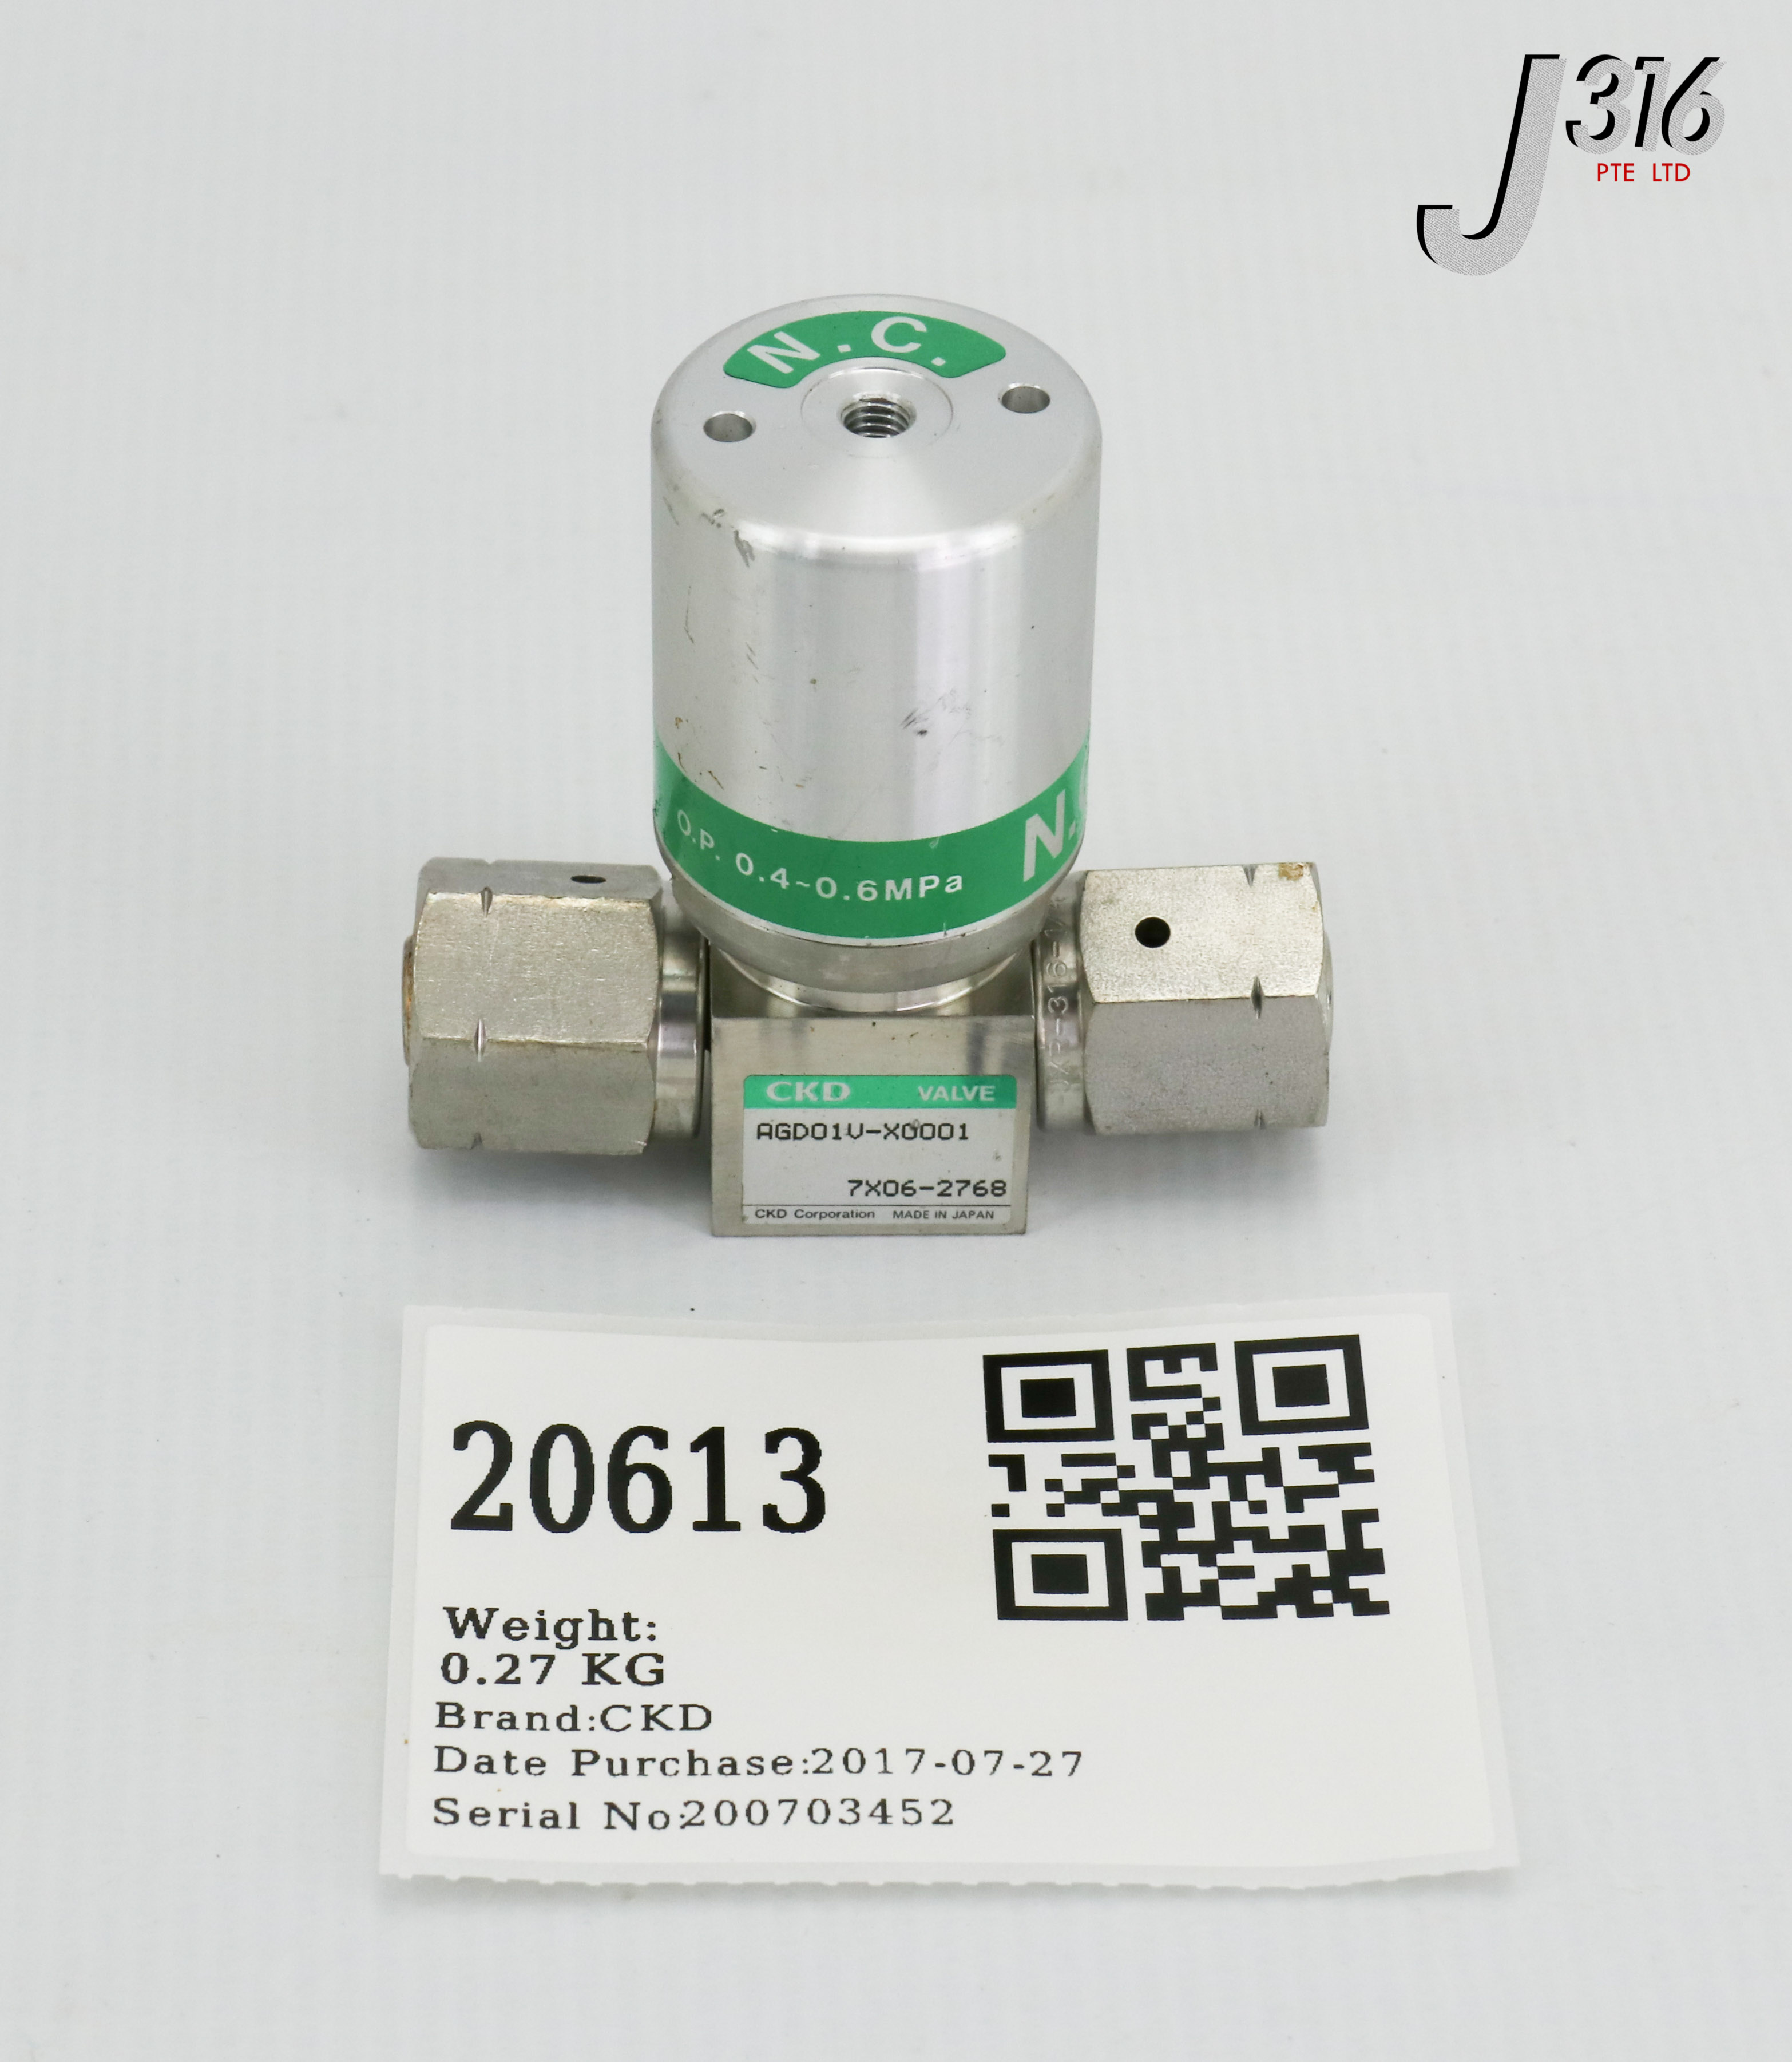 Vacuum Products/Valves Archives - Page 189 of 253 - J316Gallery